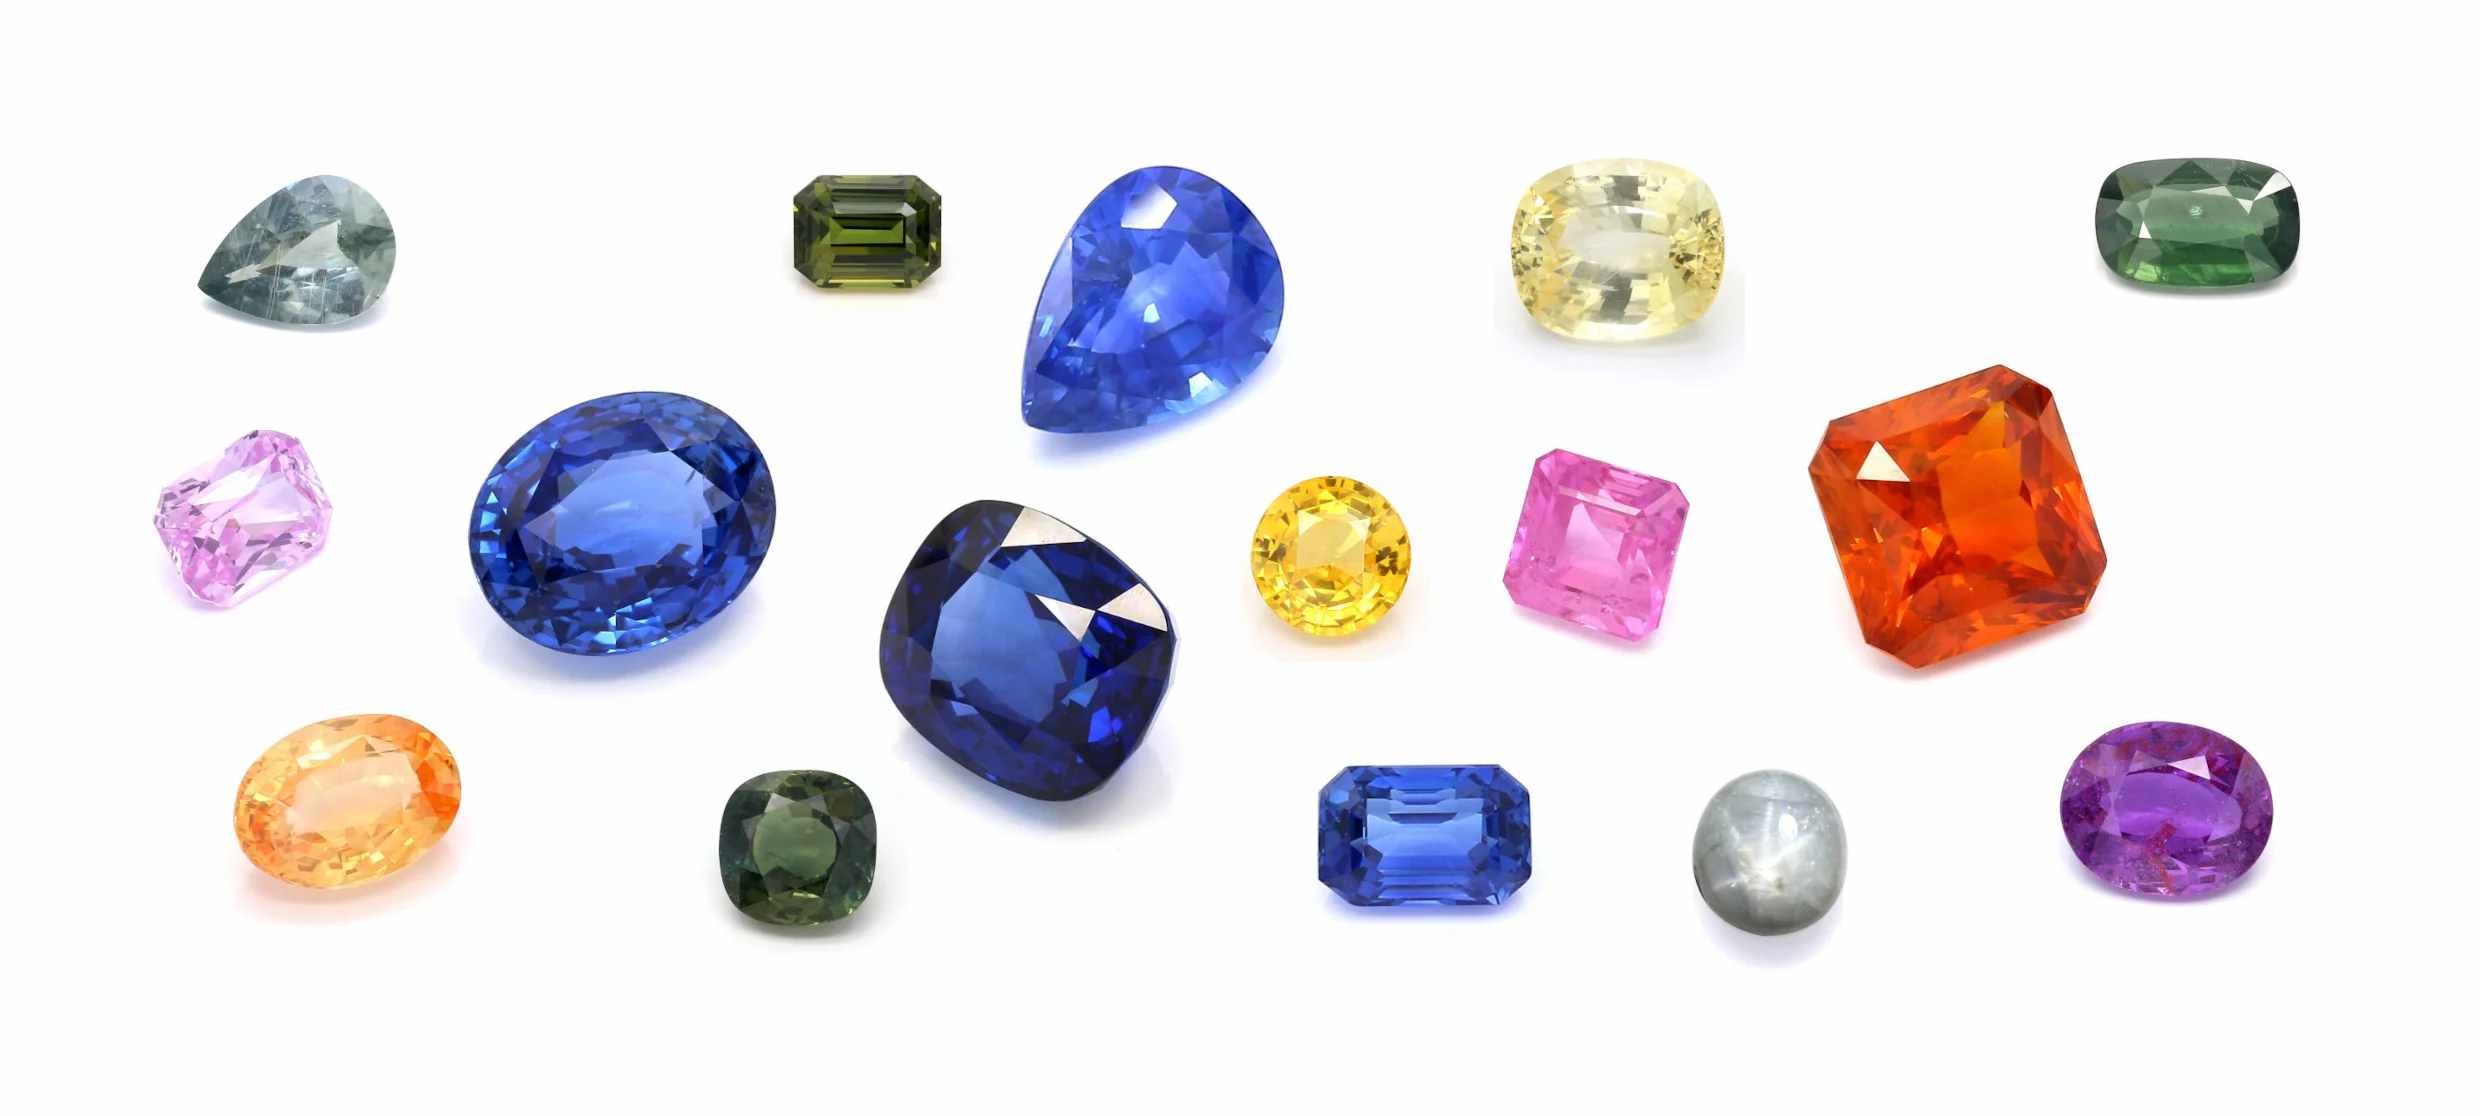 The Secrets of the Zodiac: What Your Birthstone Reveal About You